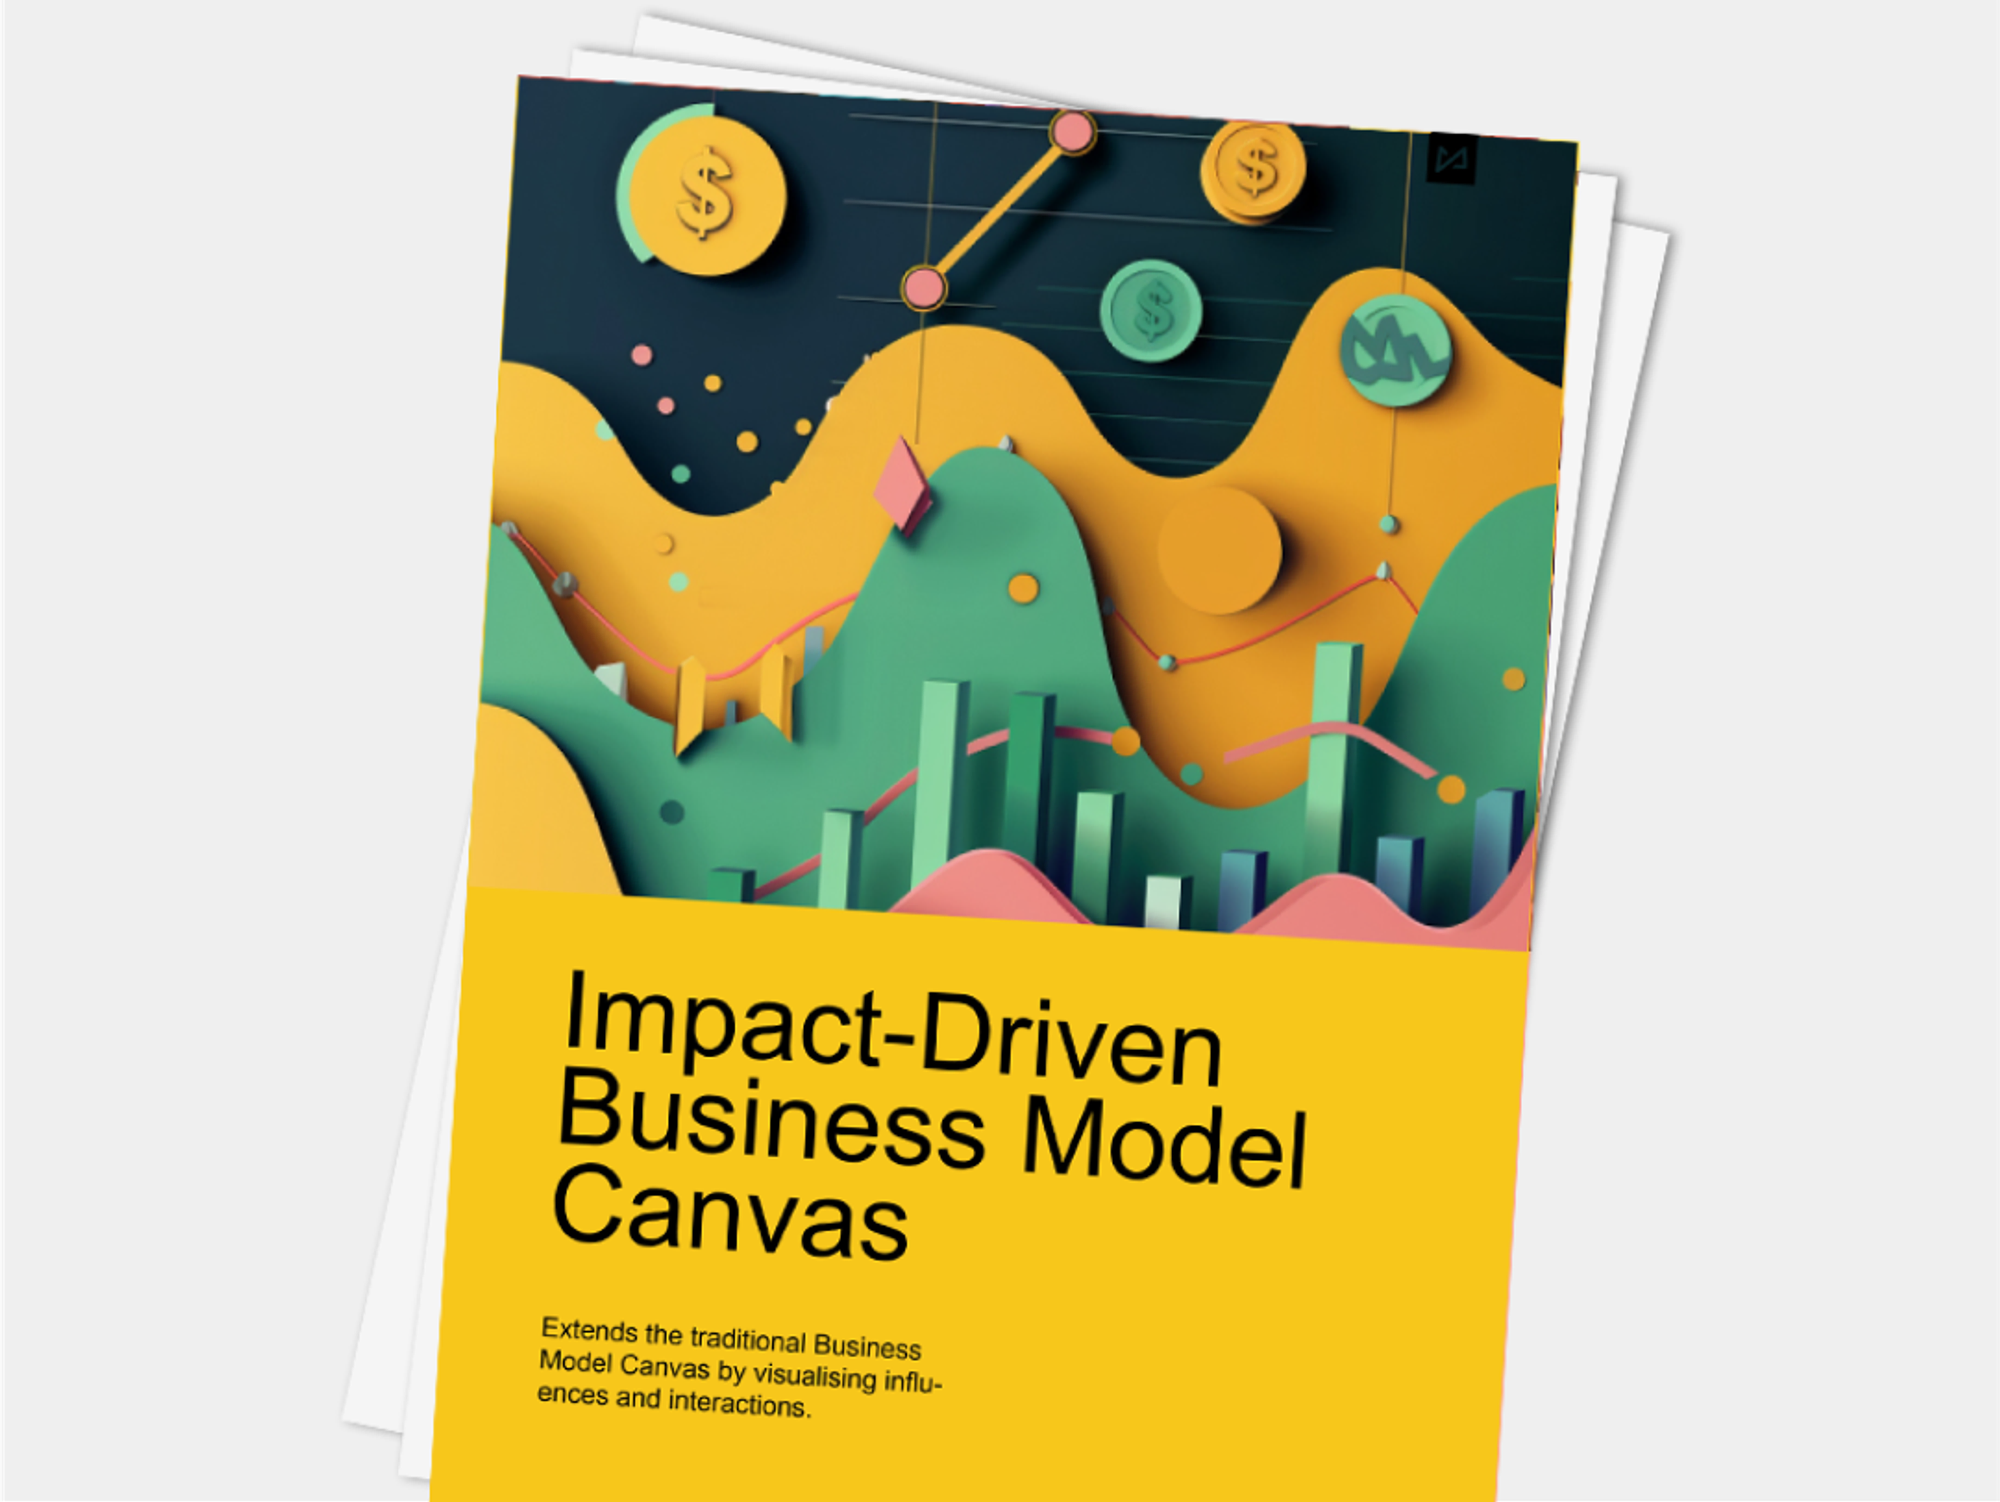 Booklet with "Impact-Driven Business Model Canvas" on its cover